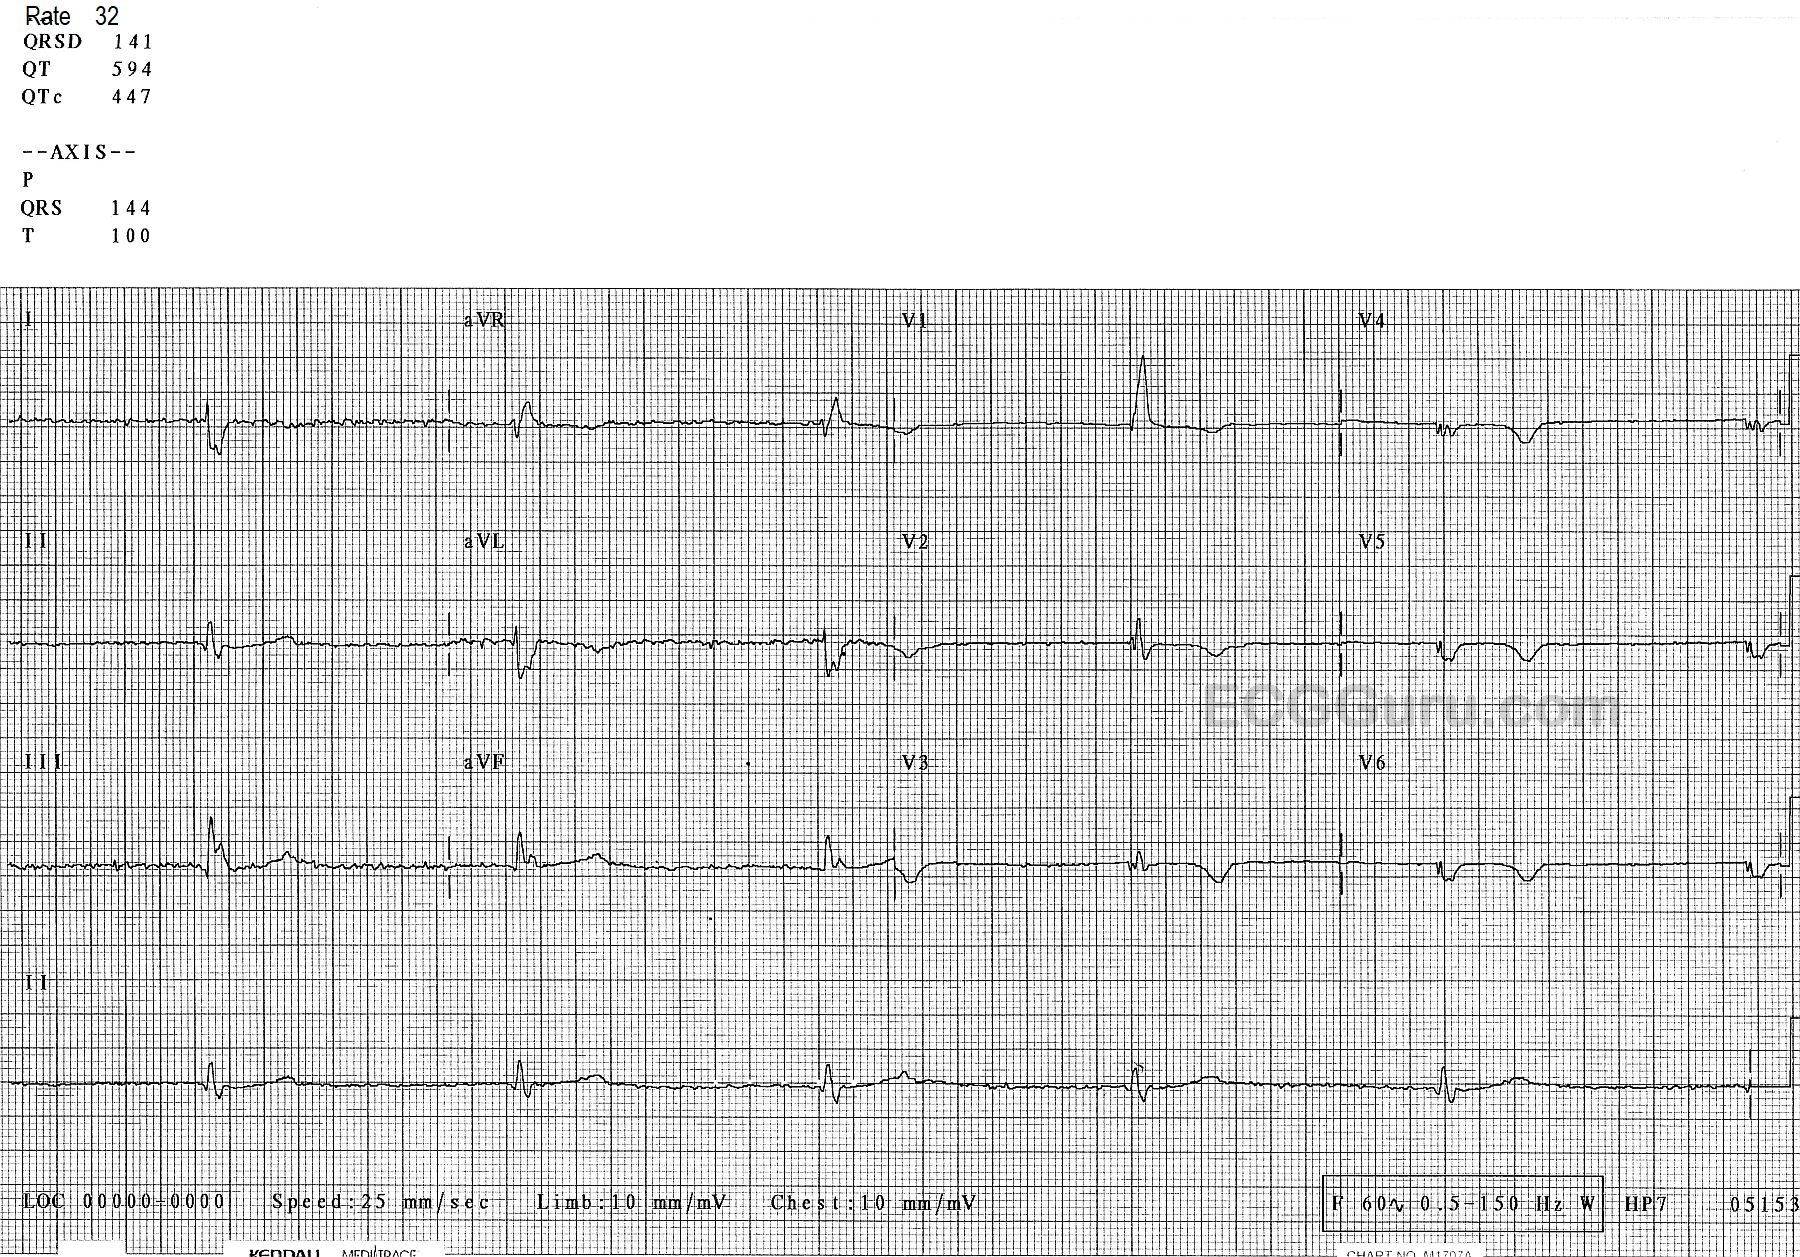 Accelerated junctional rhythm icd 10